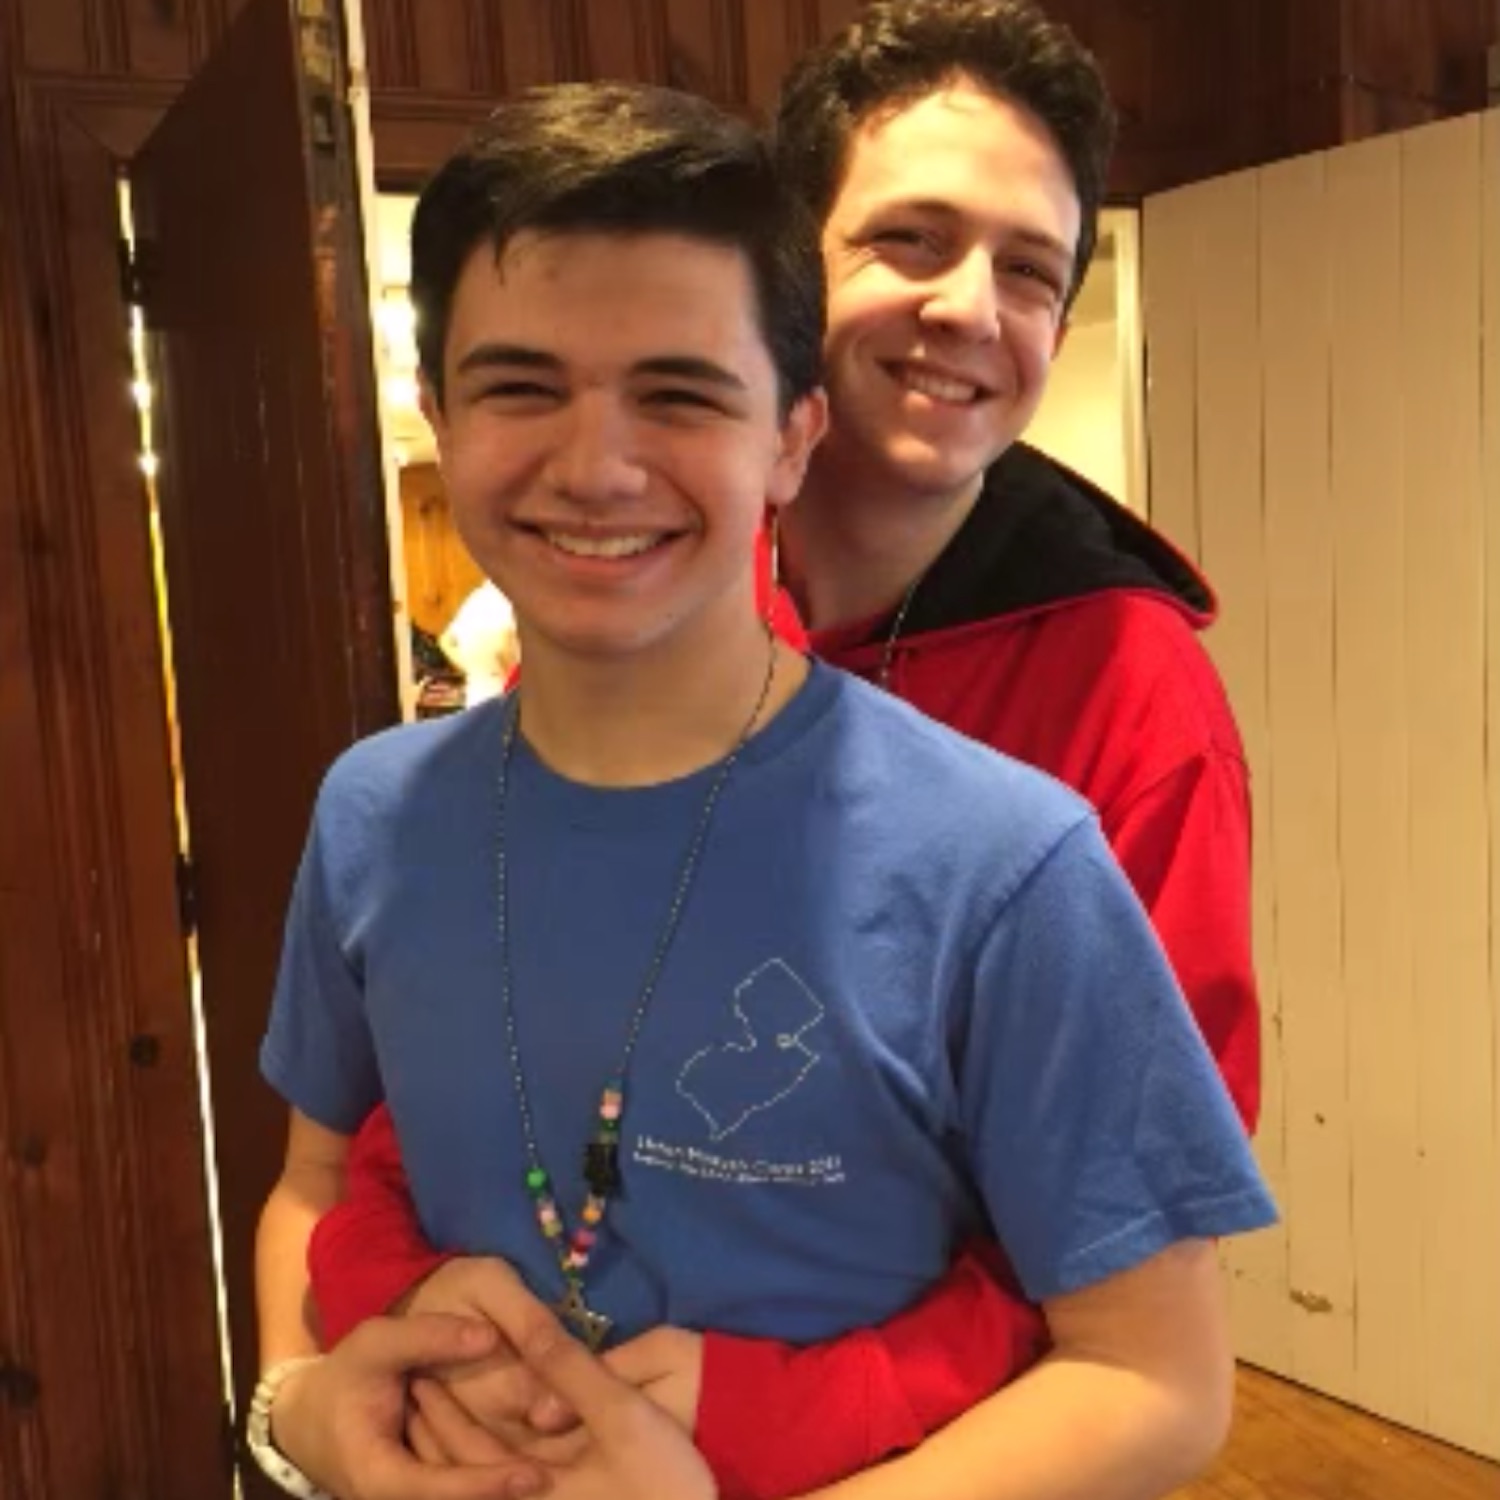 Check out the beautiful moment this gay student comes out, asks his classmate to prom ...